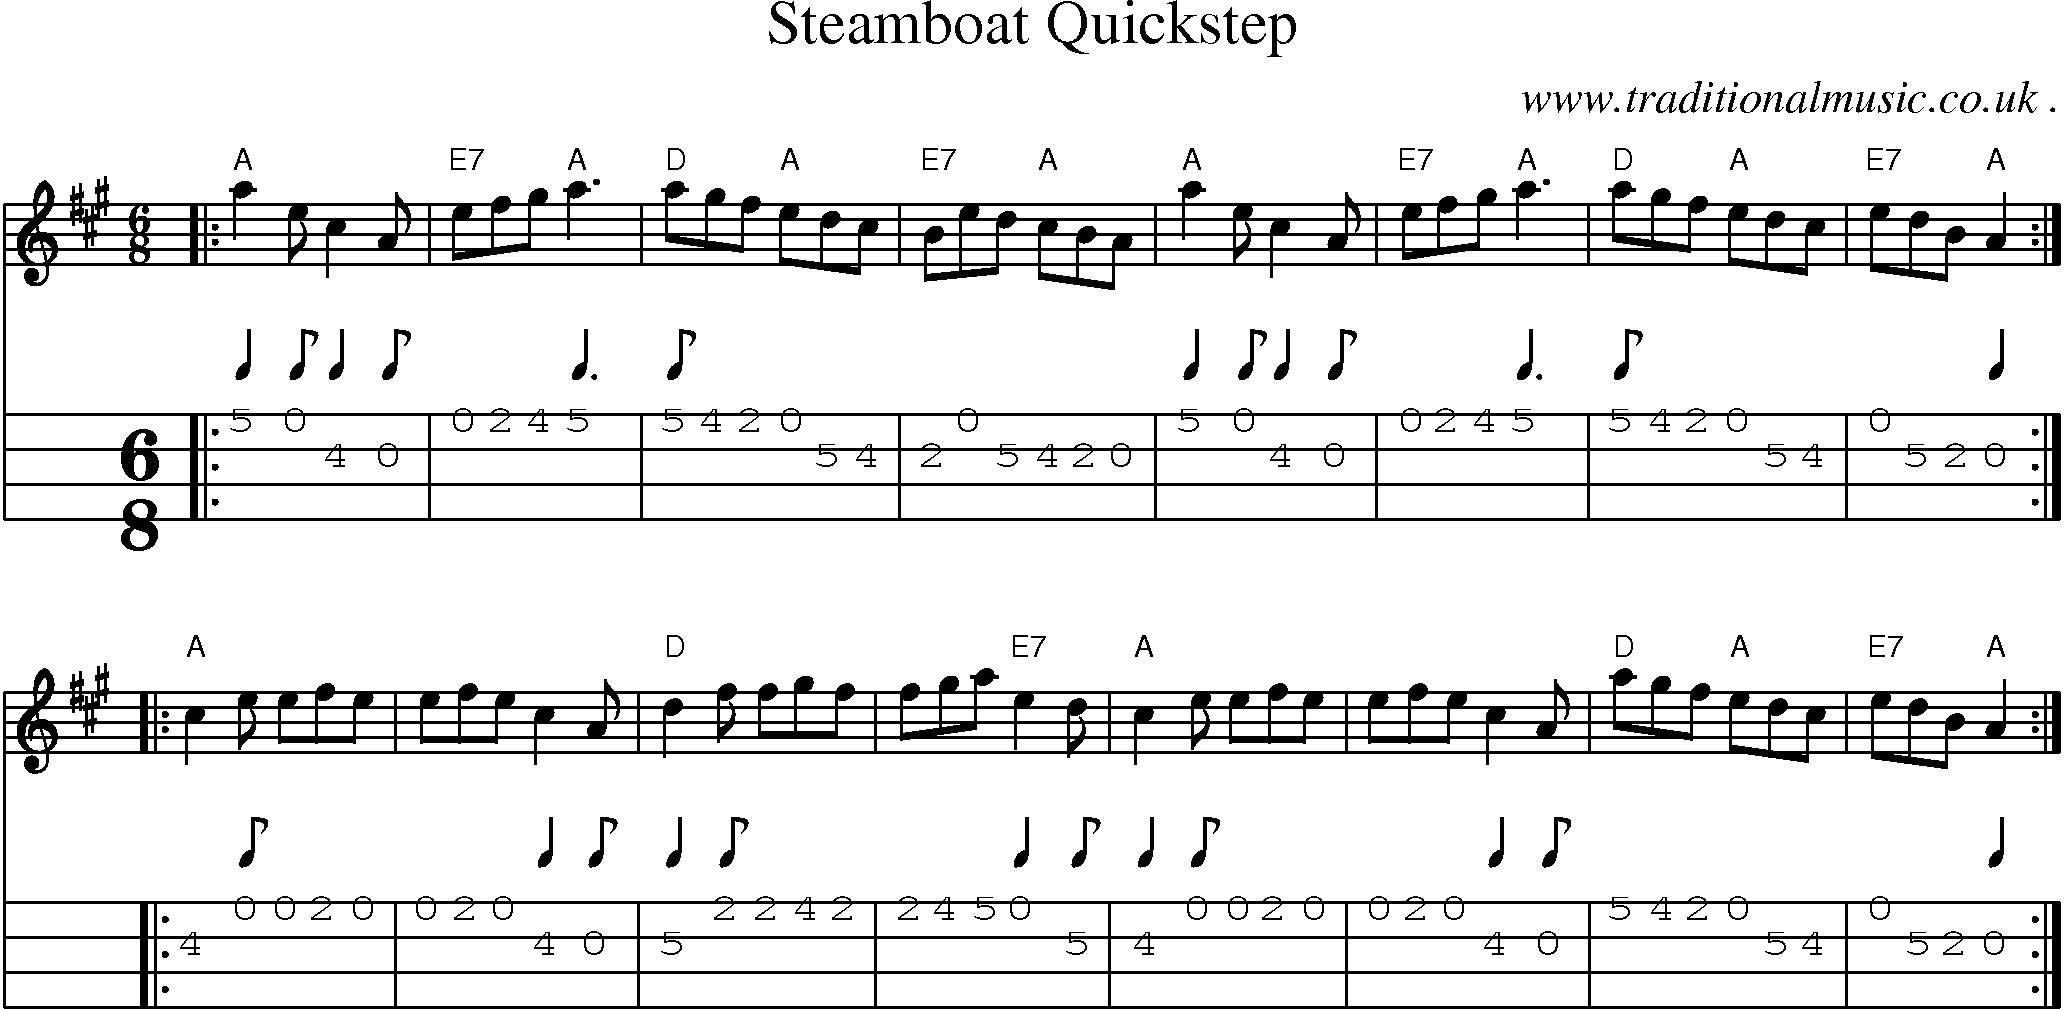 Sheet-music  score, Chords and Mandolin Tabs for Steamboat Quickstep